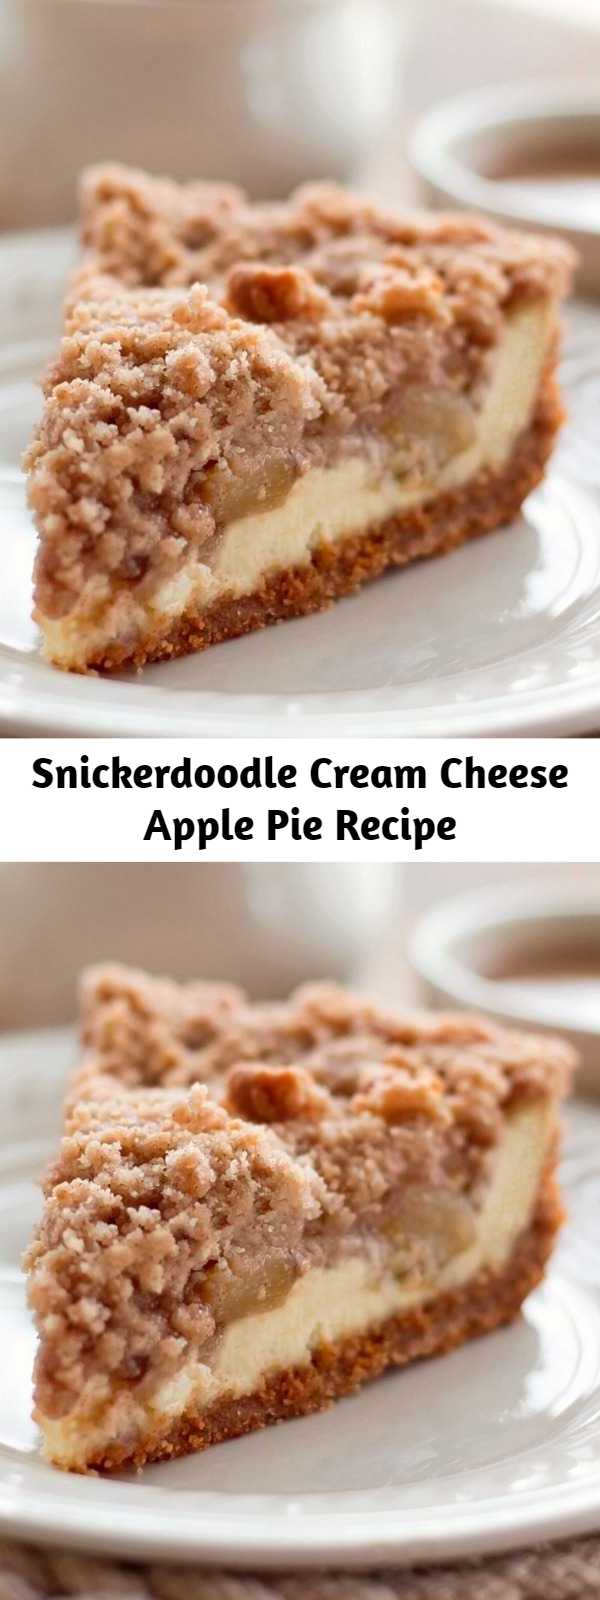 Snickerdoodle Cream Cheese Apple Pie Recipe - Snickerdoodle Cream Cheese Apple Pie is made with a snickerdoodle cookie crust. A layer of cream cheese, chopped apple pie filling and a snickerdoodle crumb topping.